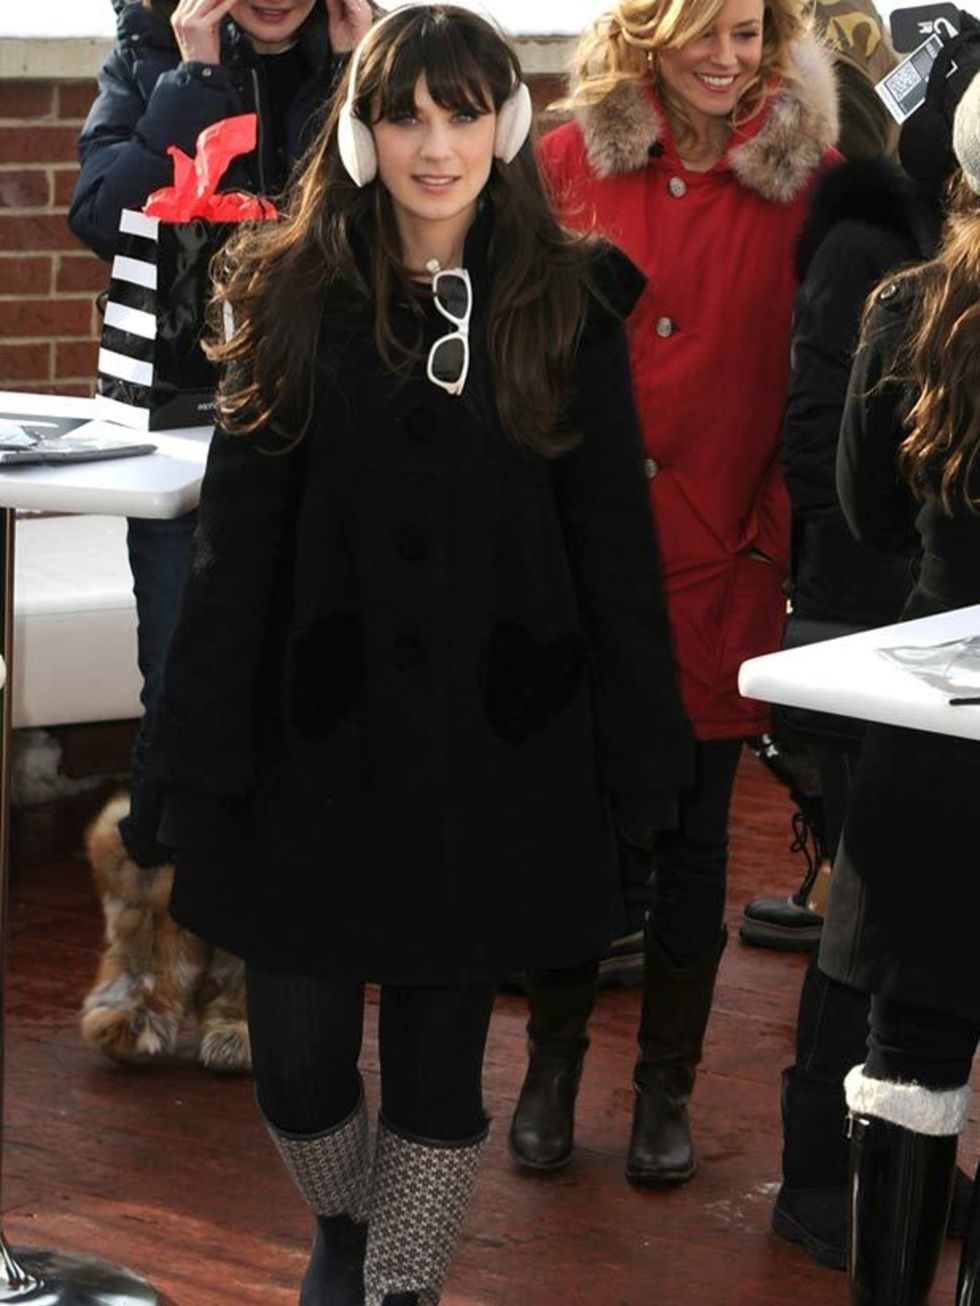 <p><a href="http://www.elleuk.com/starstyle/style-files/%28section%29/Zooey-Deschanel">Zooey Deschanel</a> out and about at the Sundance Film Festival in Park City, Utah, 23 January 2011</p>